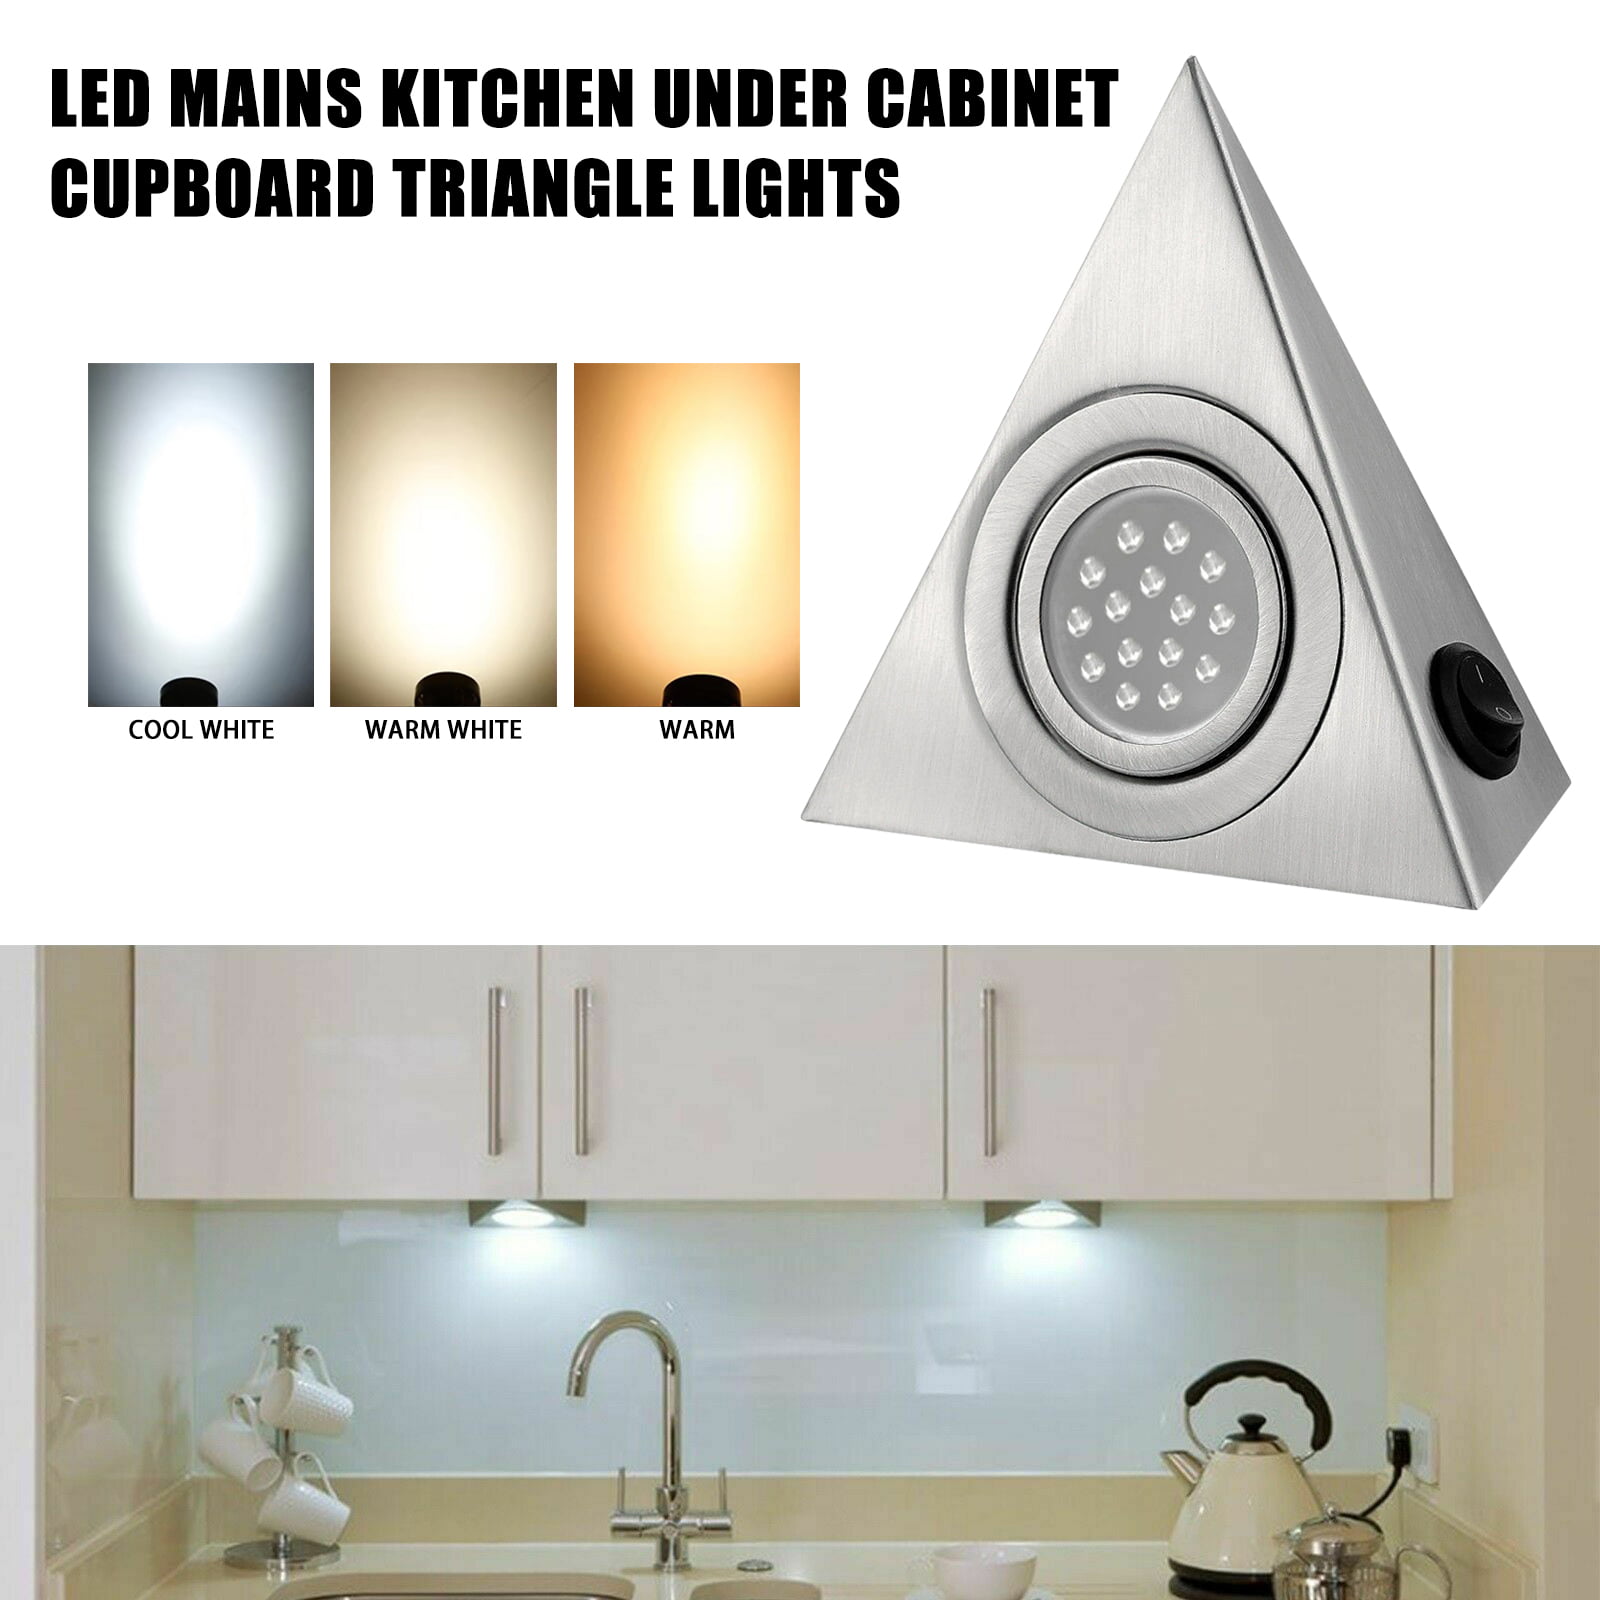 everso Kitchen Under Cabinet Triangle LED Light Stainless Steel Downlight warm cool cool white 3pcs 